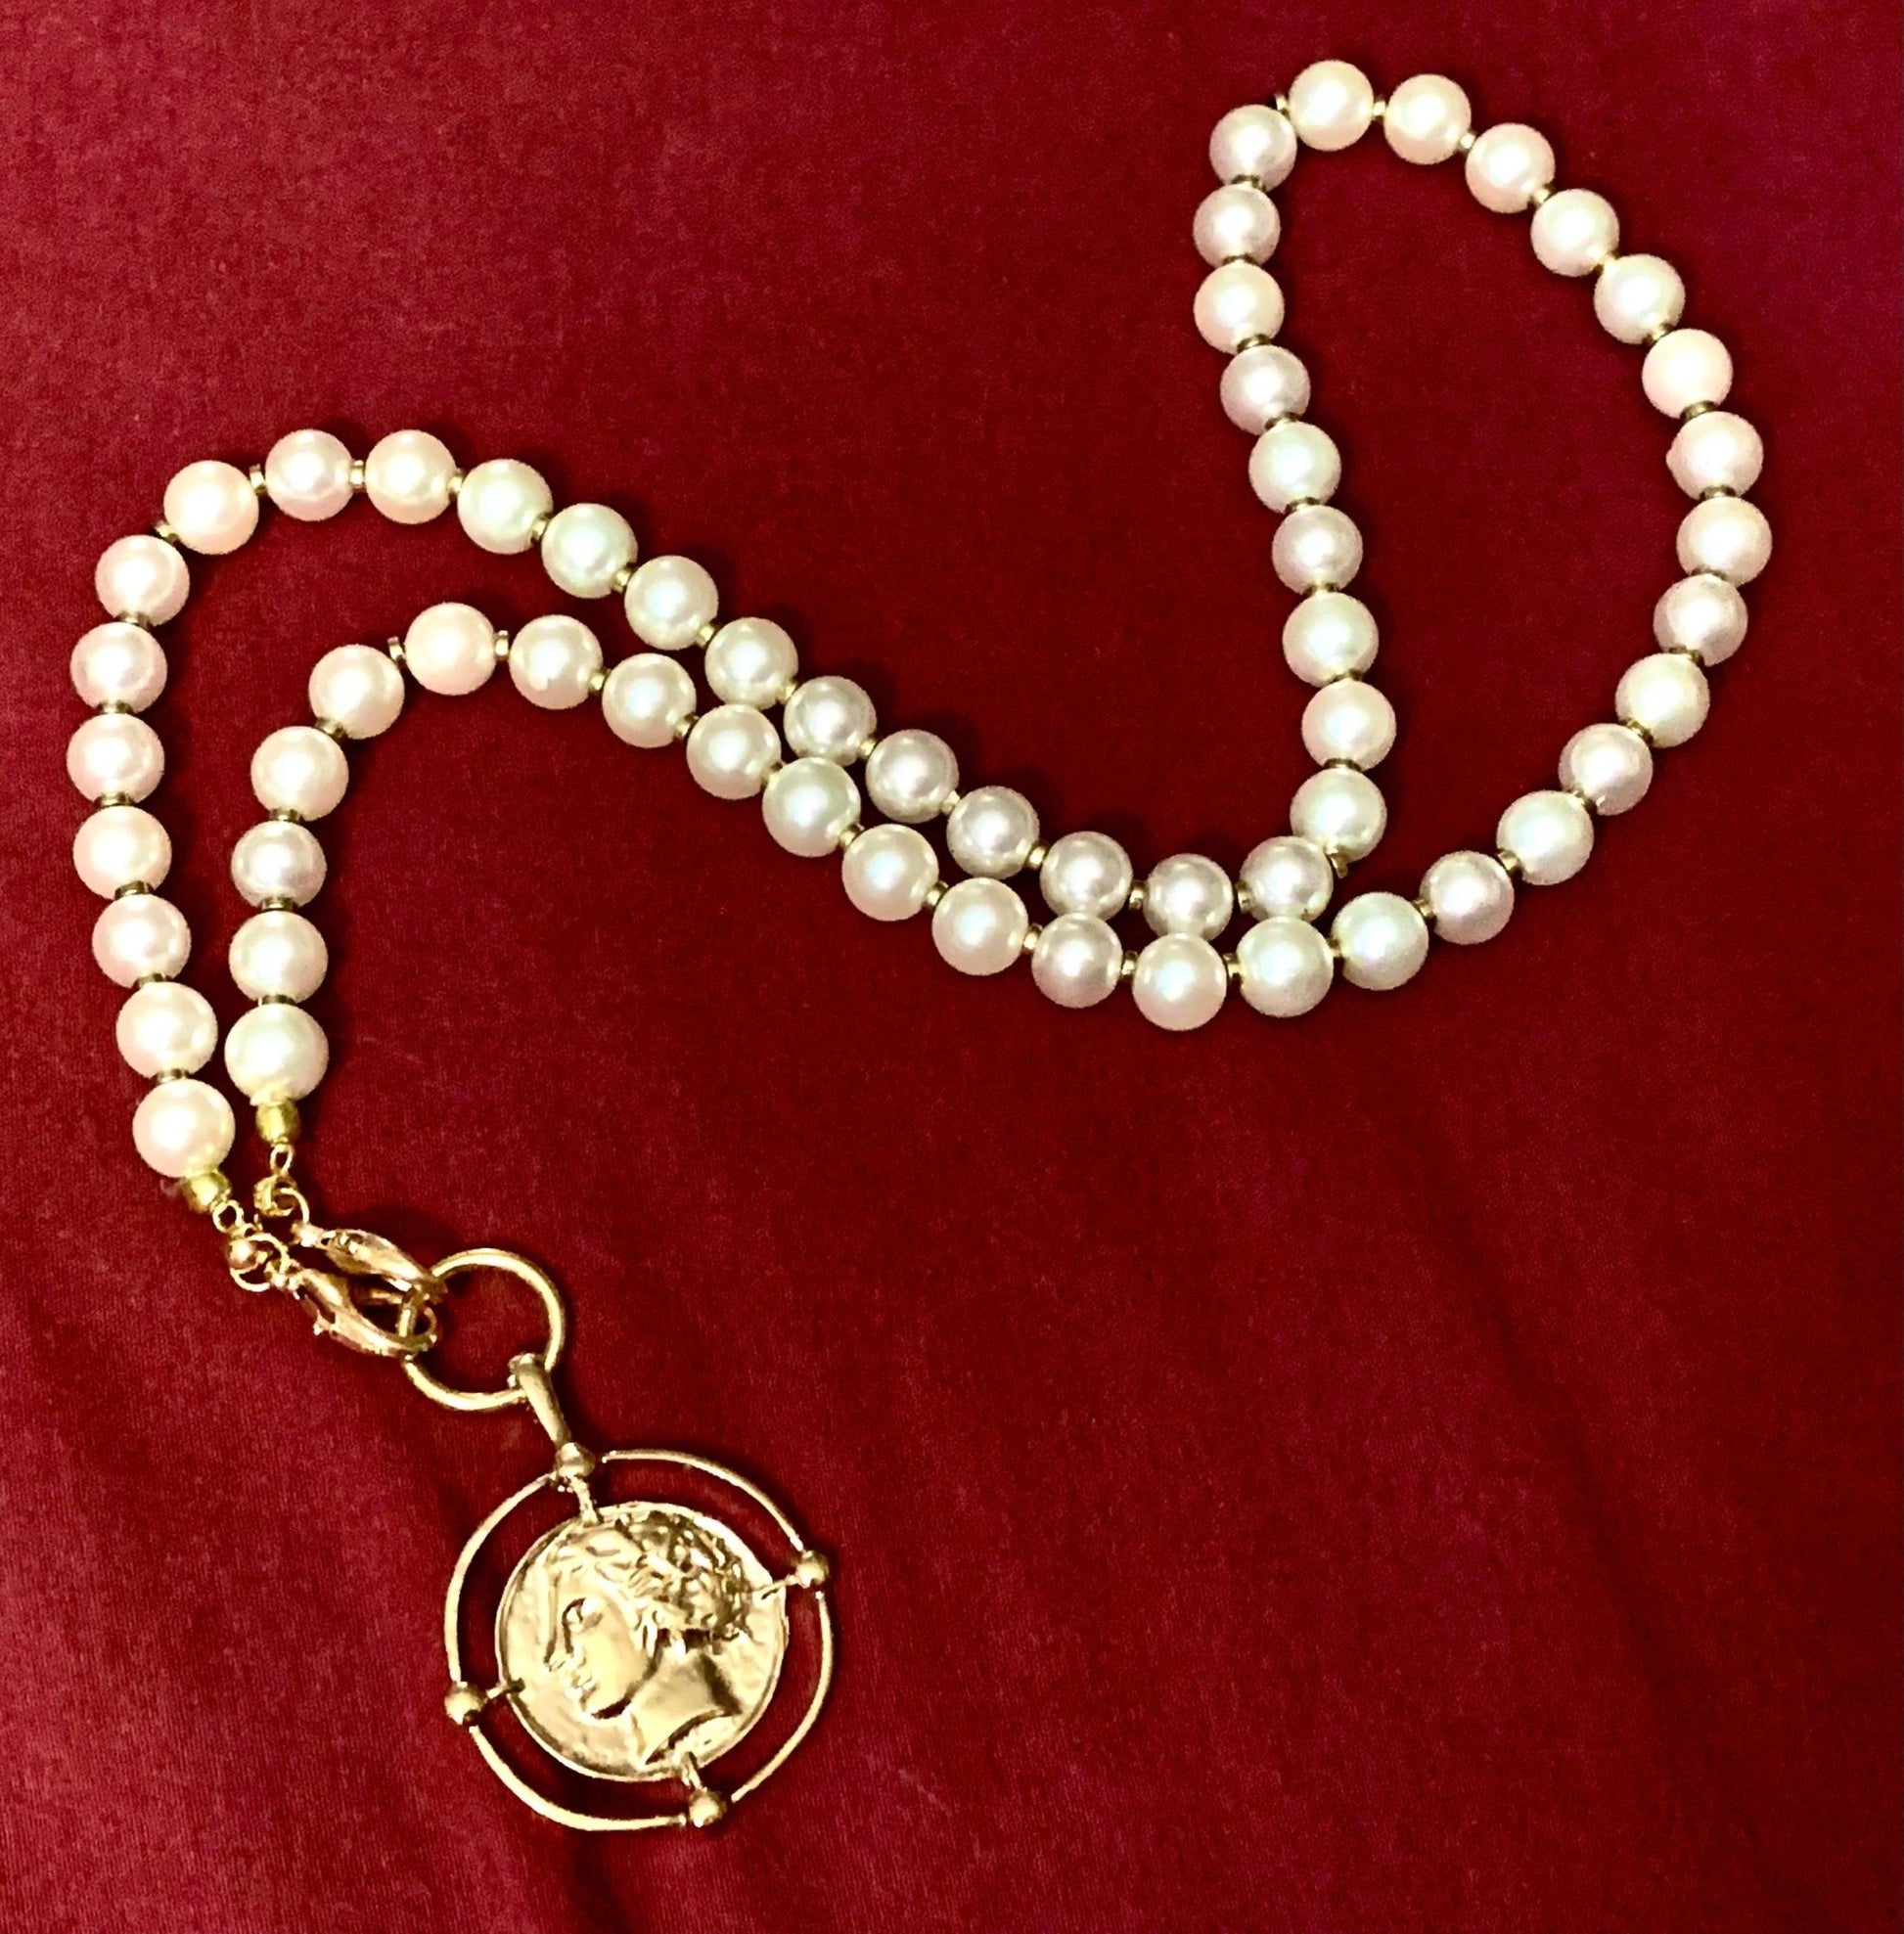 🔴SOLD🔴 Beth Handmade Faux Pearl and Gold Plated Hematite 23" Necklace/ Choker With Coin Pendant - Born Mystics